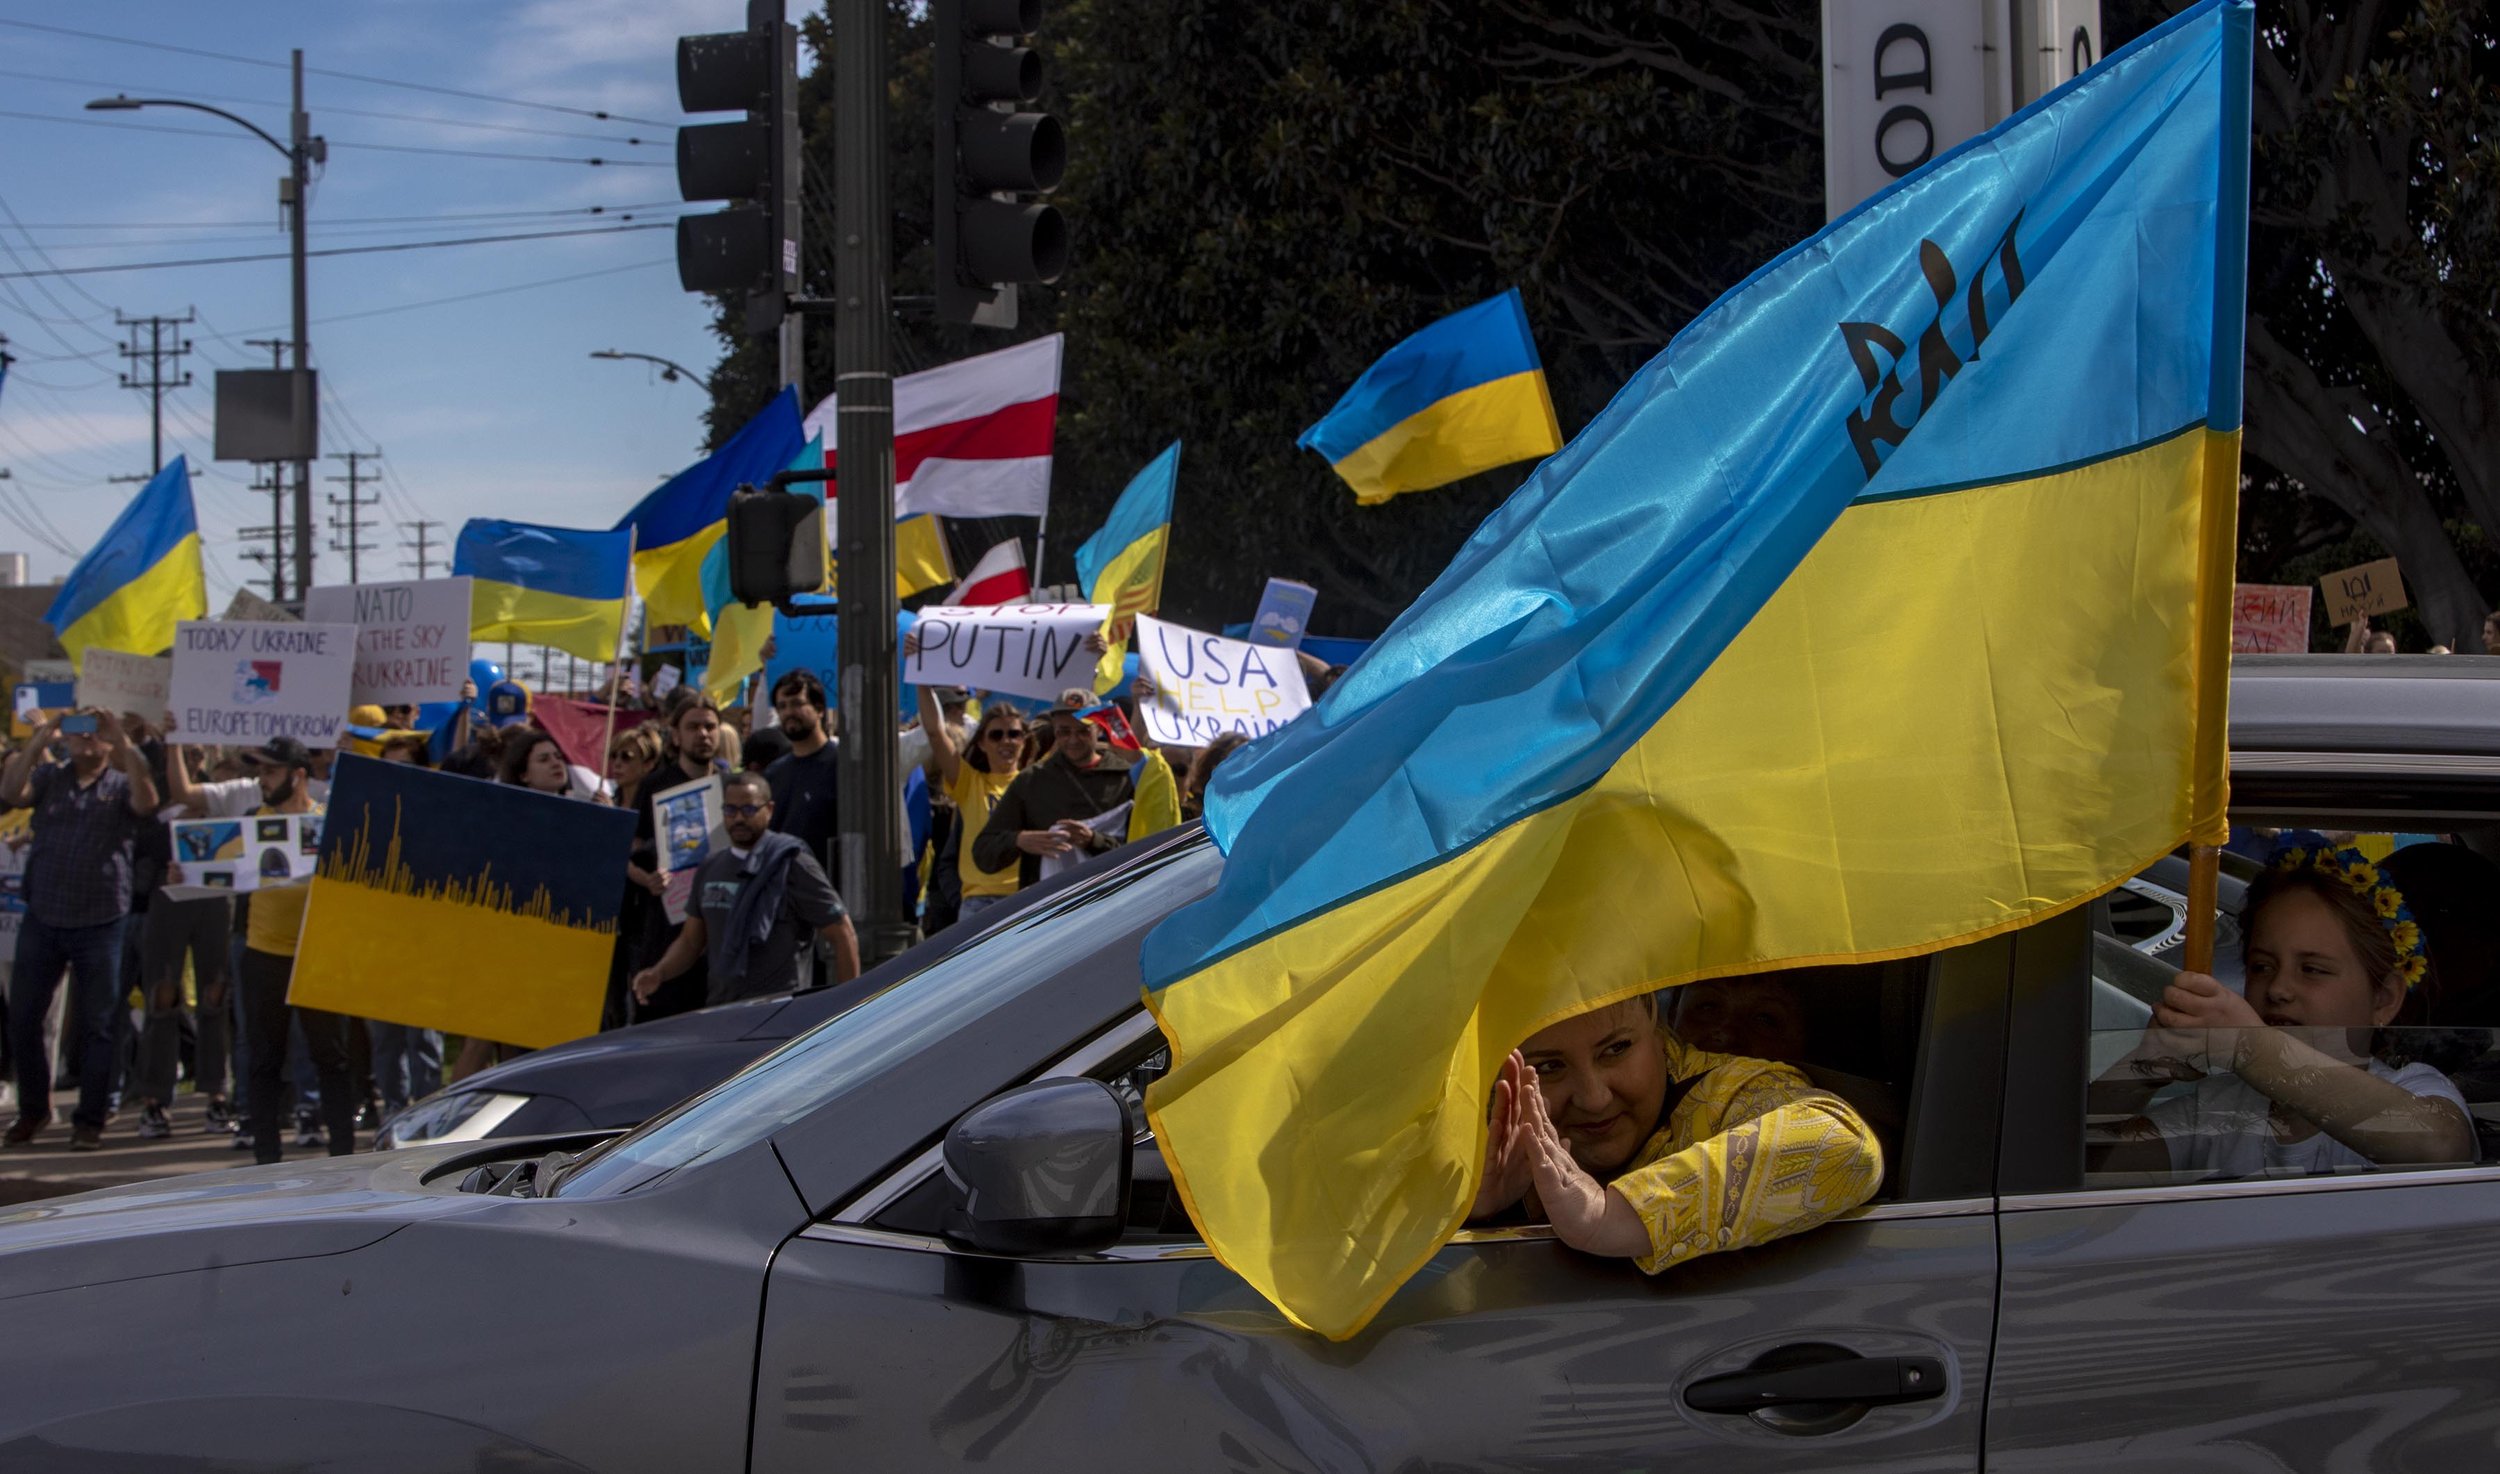  A woman and child were among the hundreds of people from the Ukrainian American community in Los Angeles and their supporters, who gathered at the intersection of Santa Monica and Sepulveda Boulevards on foot and in cars  to protest against Russia's